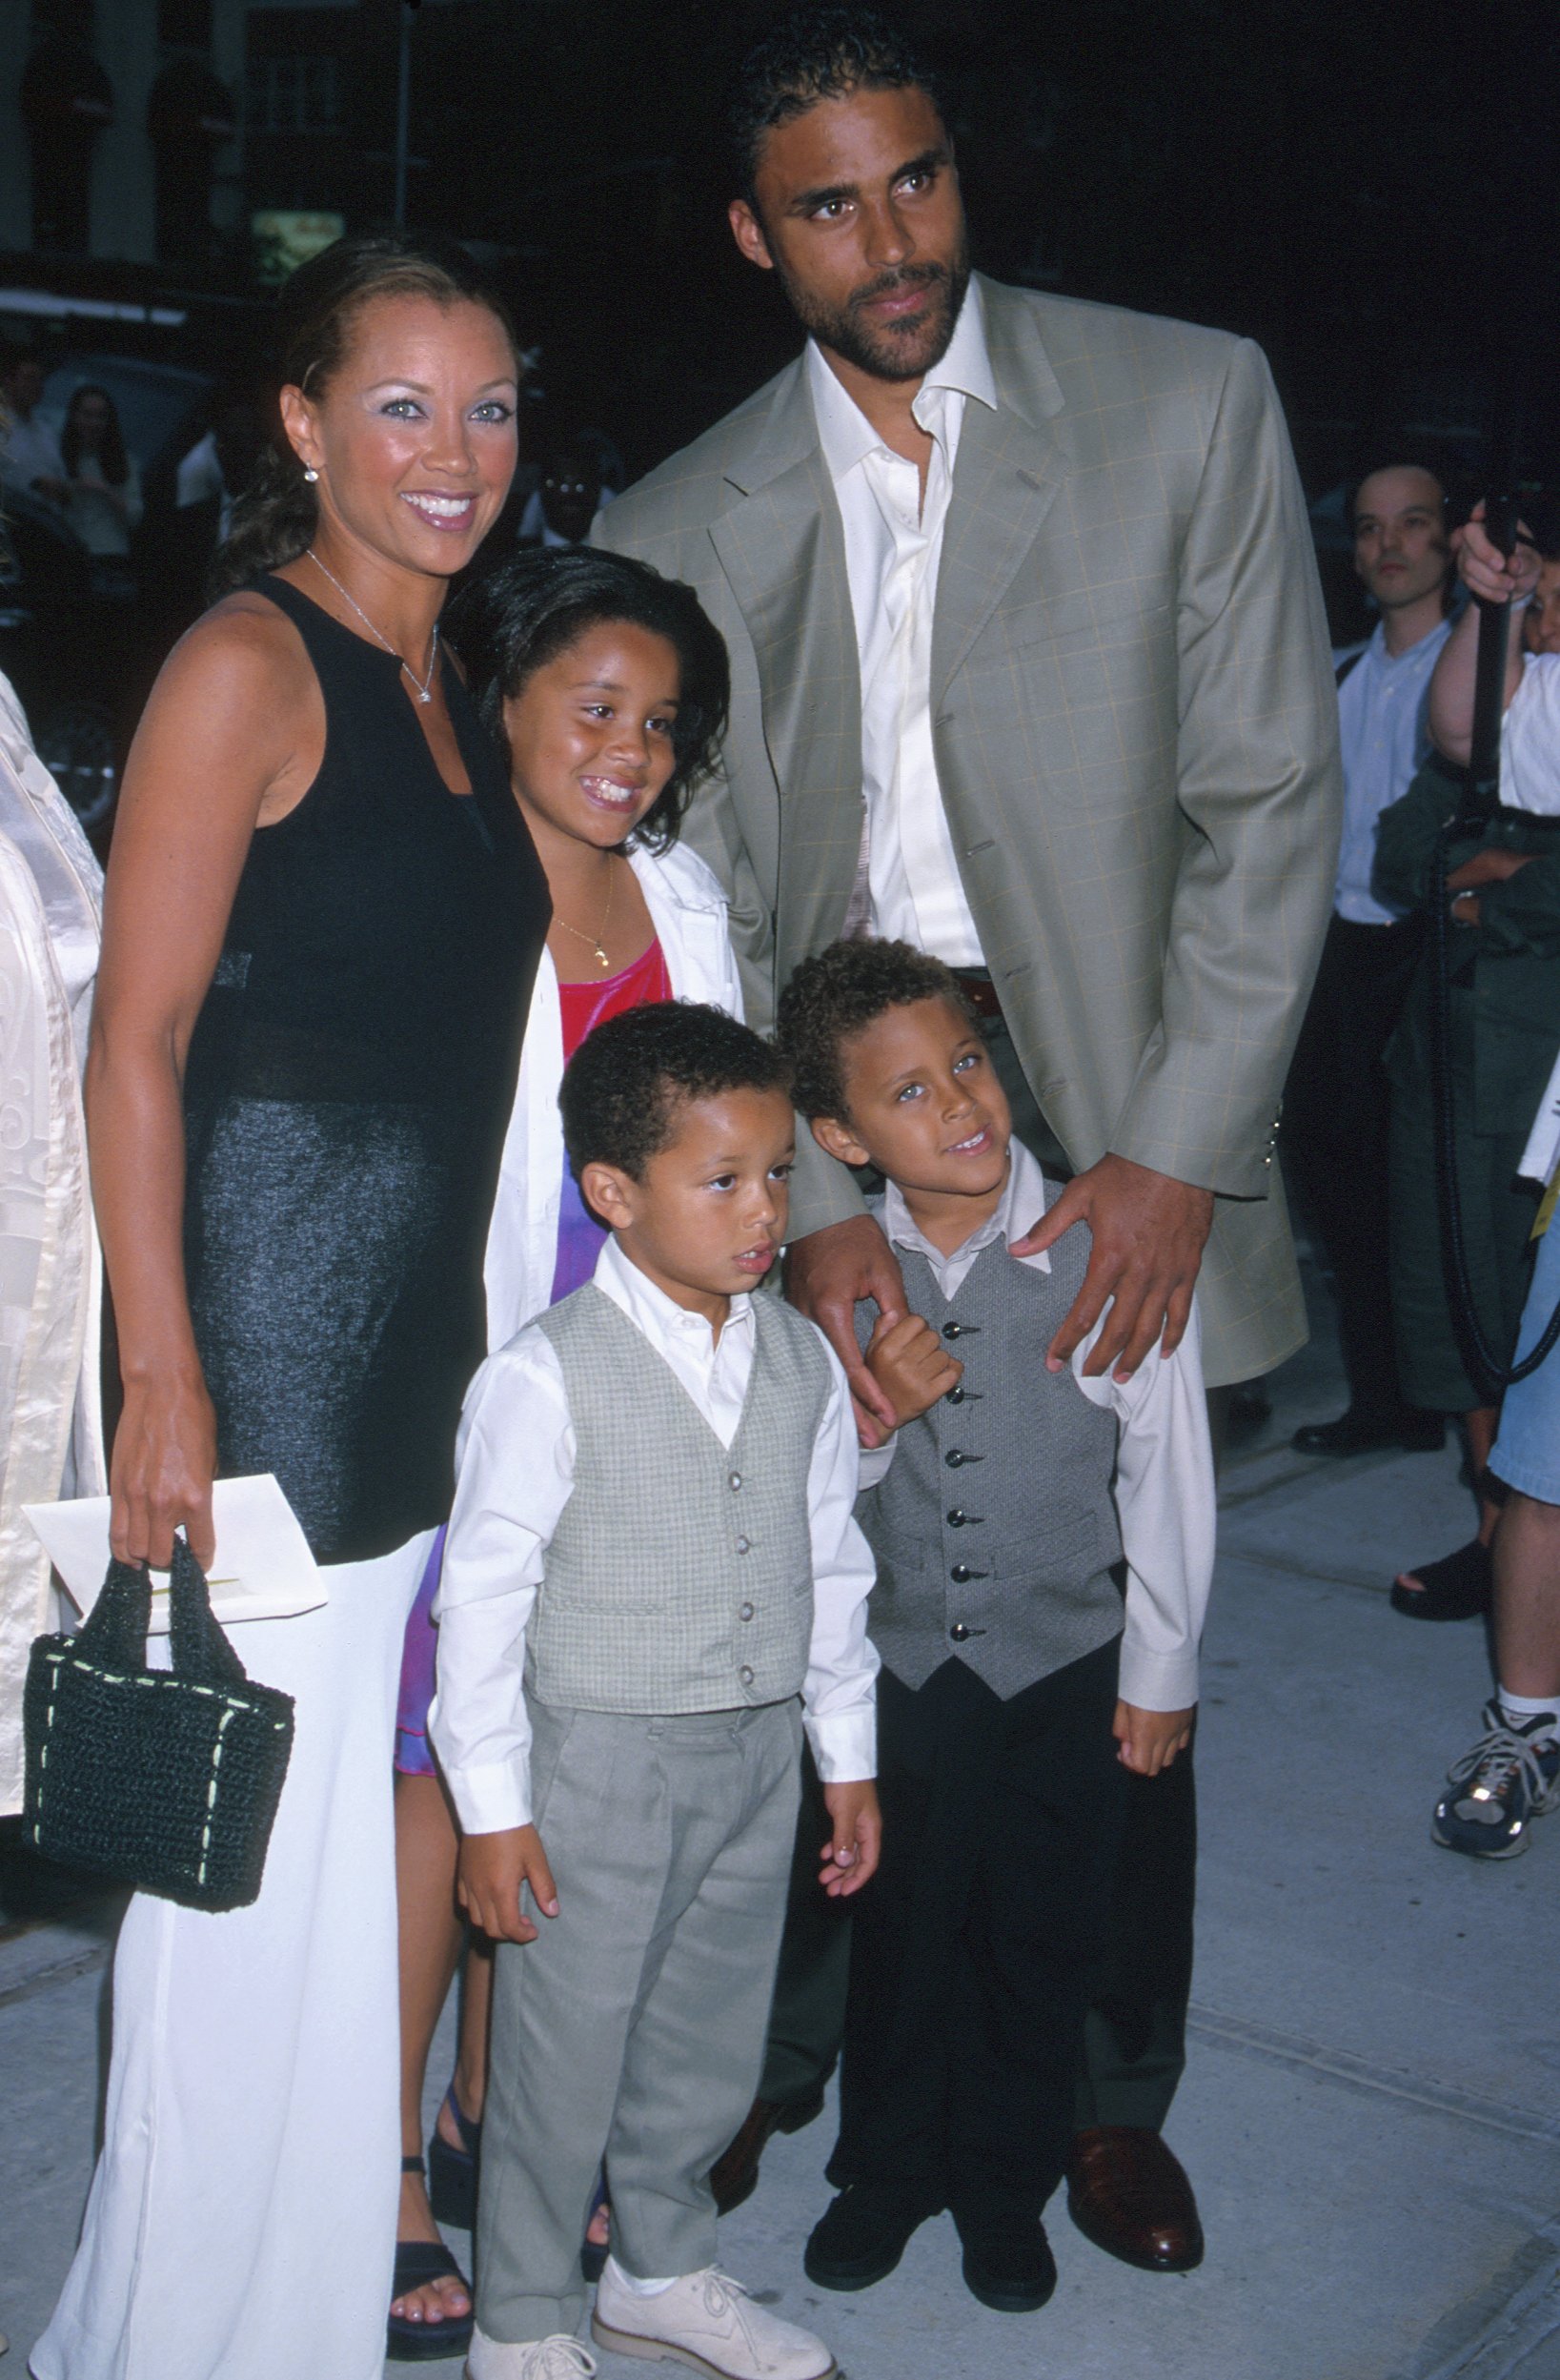 Singer/Actress Vanessa Williams with boyfriend Rick Fox of the L.A. Lakers and her children at the premiere of the new Disney motion picture Tarzan at the Loews Theatre | Source: Getty Images